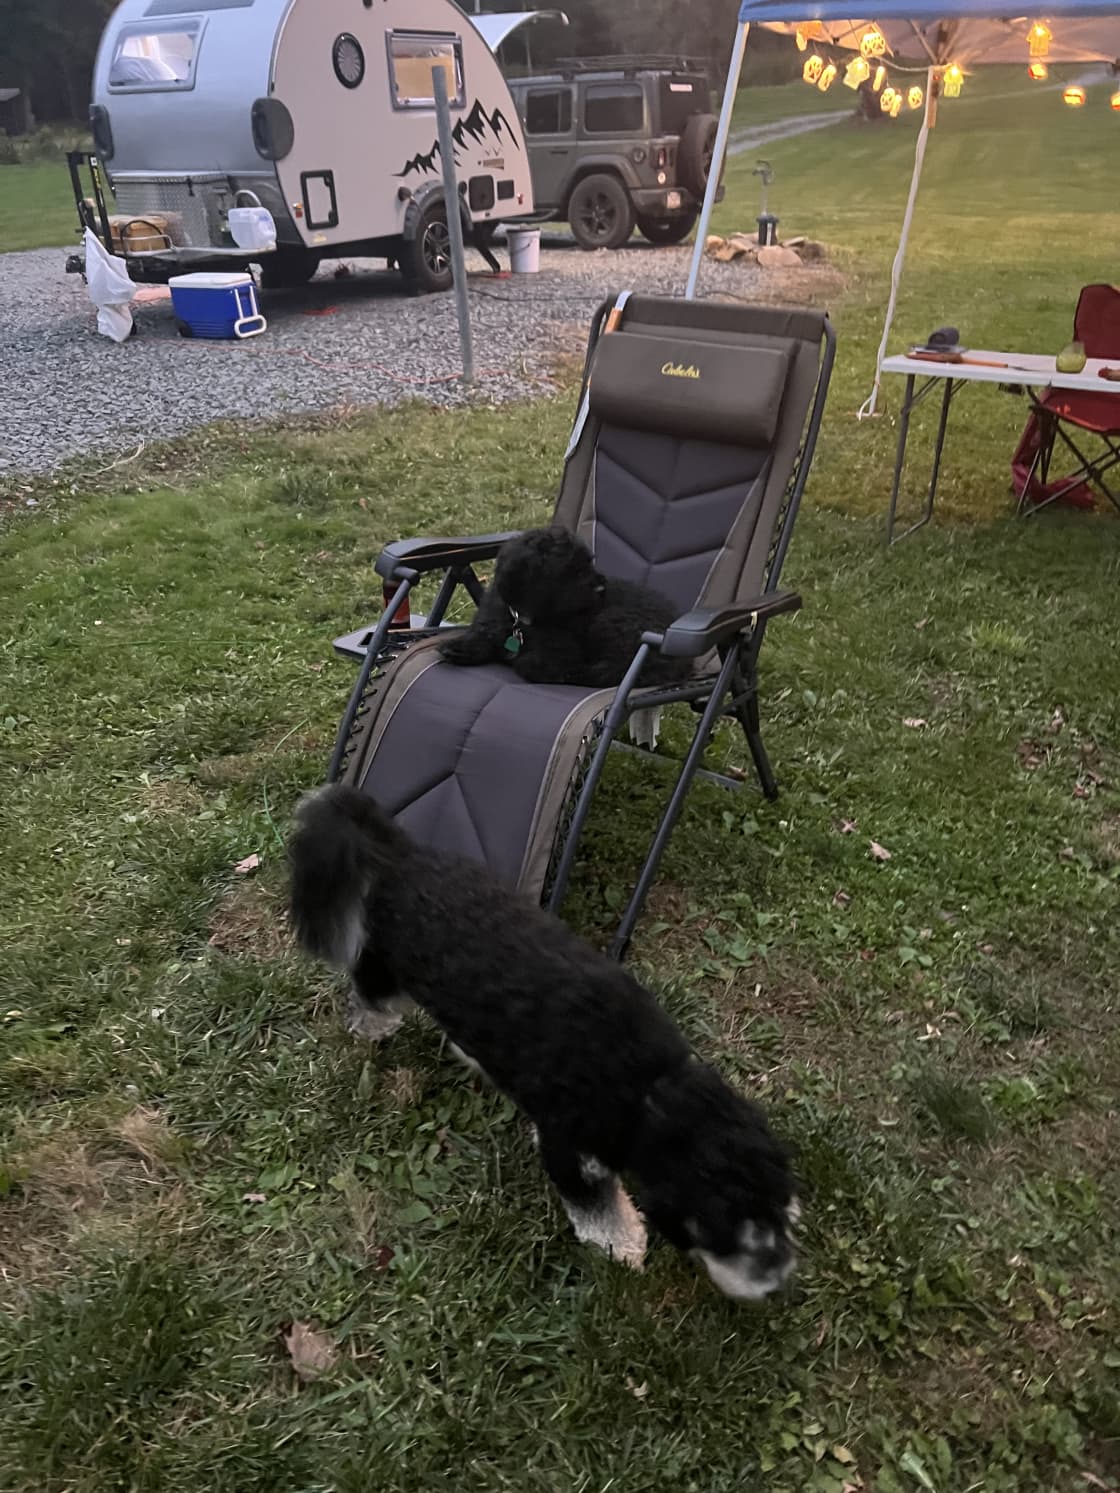 Dogs taking turn in the chair of happiness